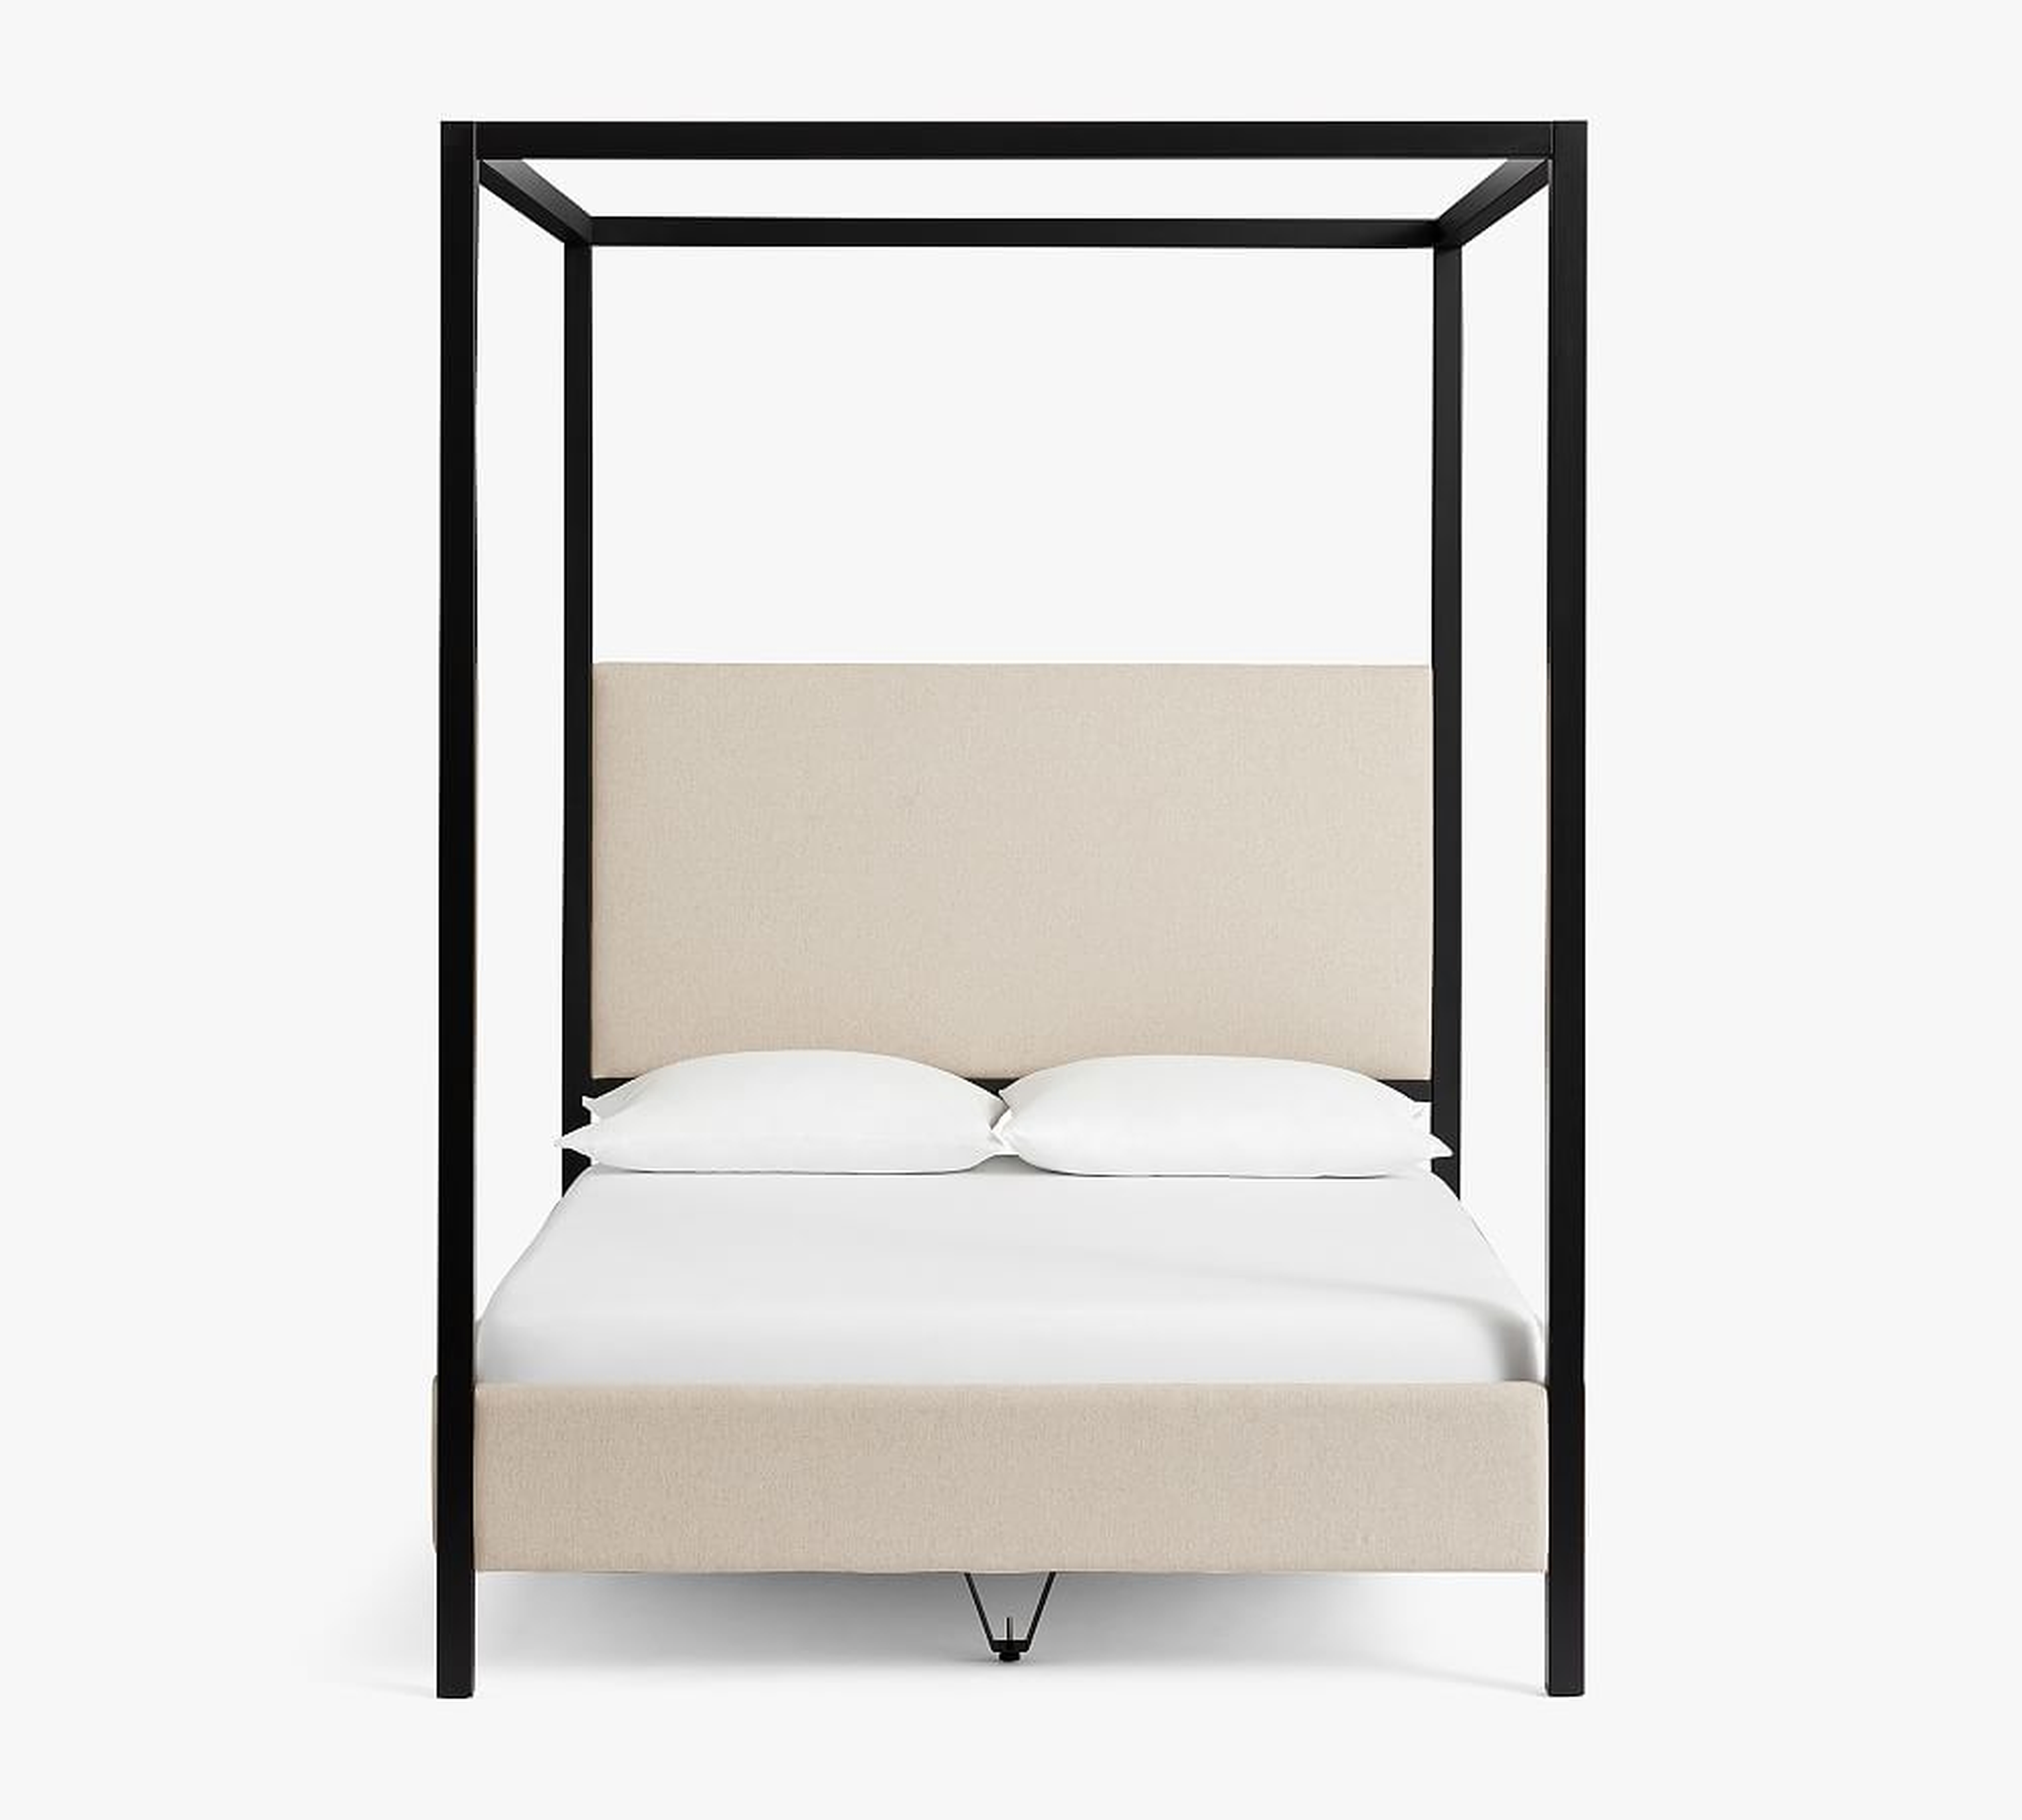 Atwell Metal Canopy Bed, Black, King - Pottery Barn